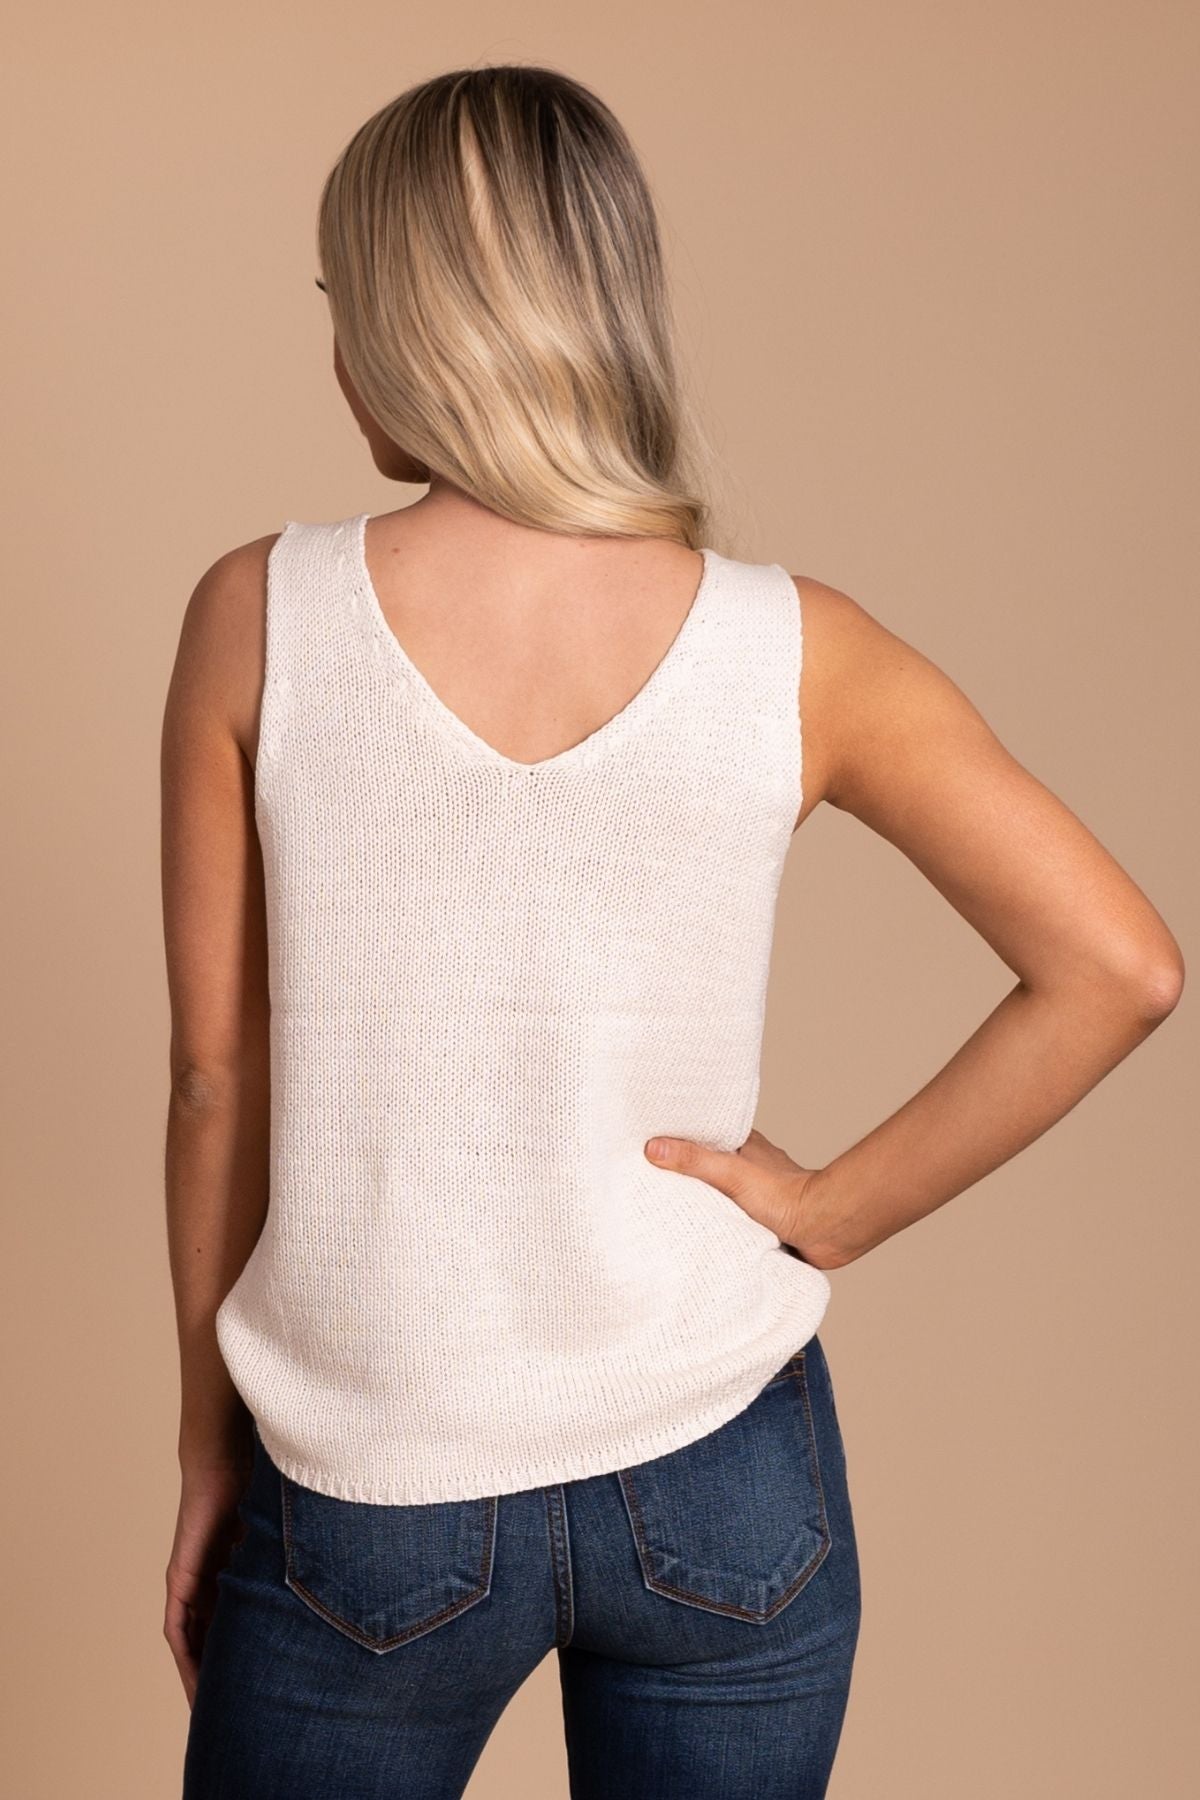 Women's Relaxed Fit Boutique Tank Top